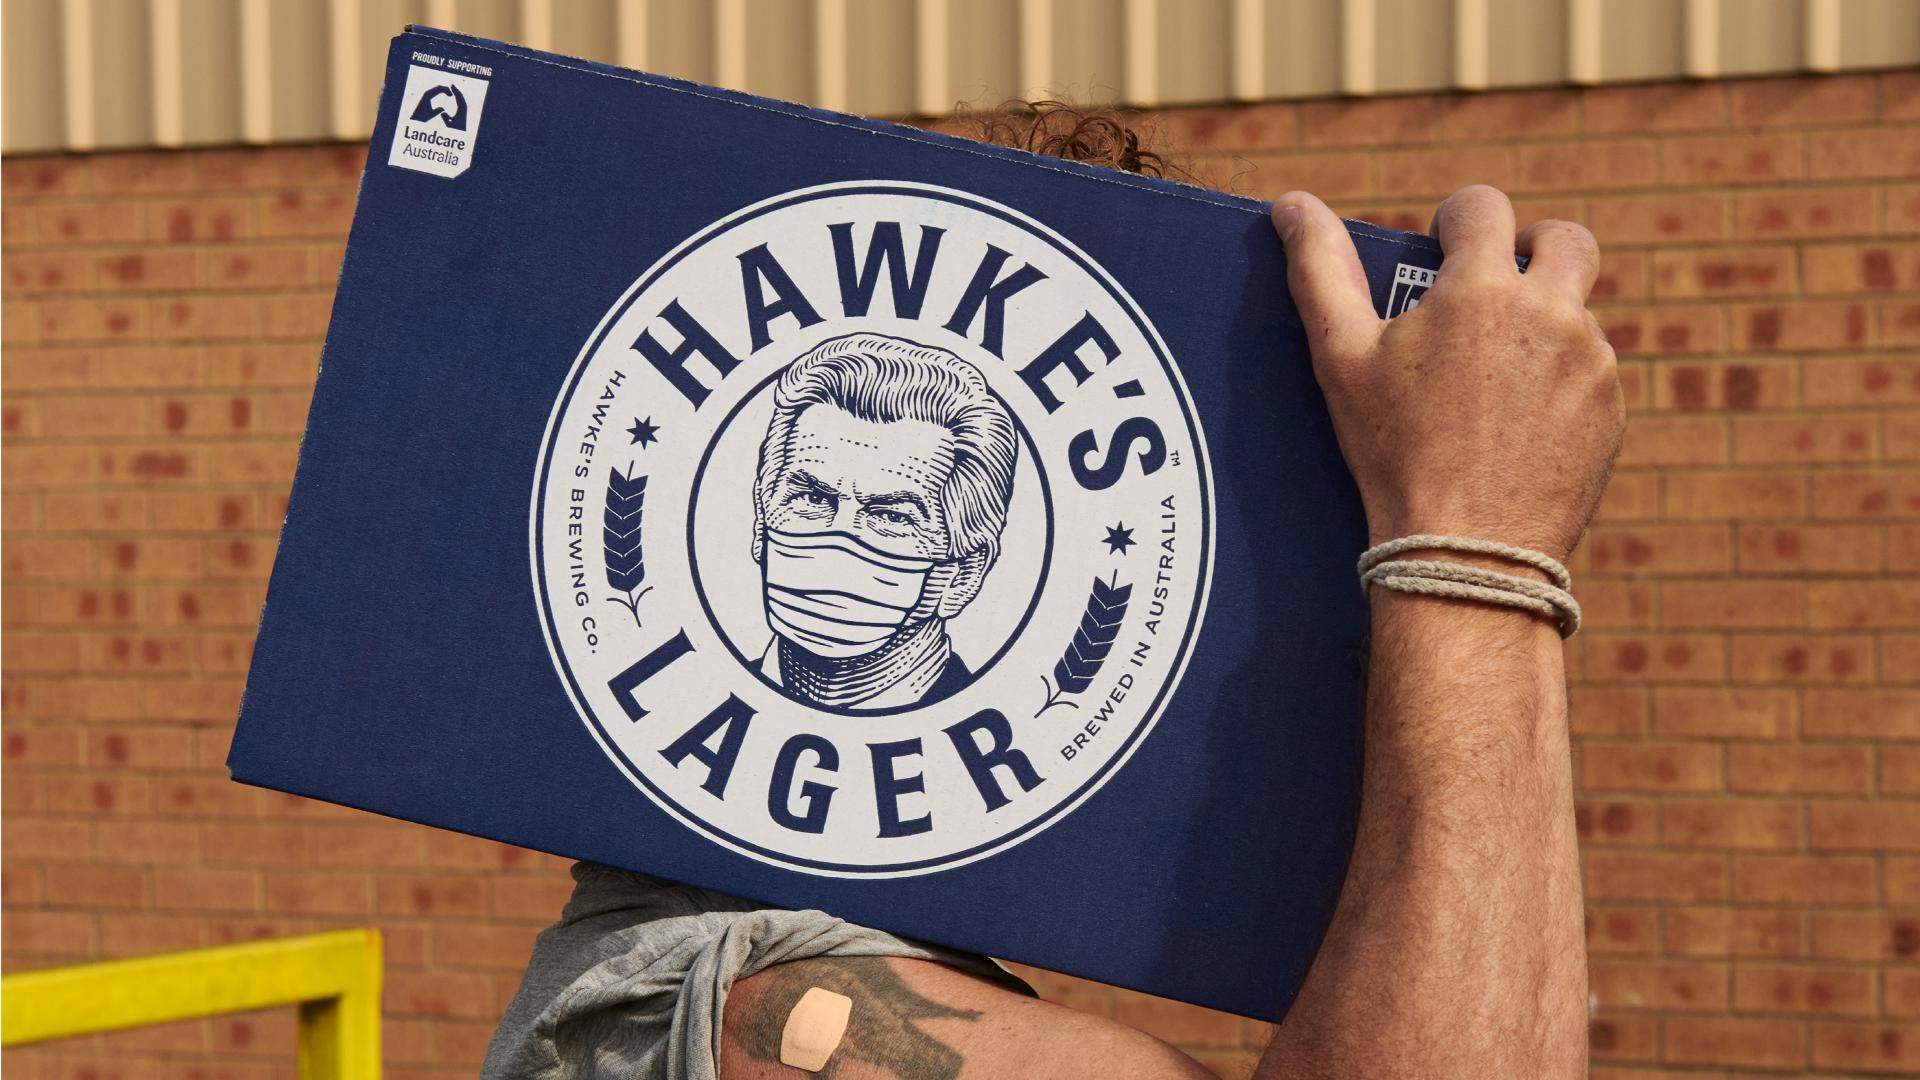 Hawke's Brewing Co Is Giving Free Slabs of Beer to Folks Who've Just Been Vaccinated